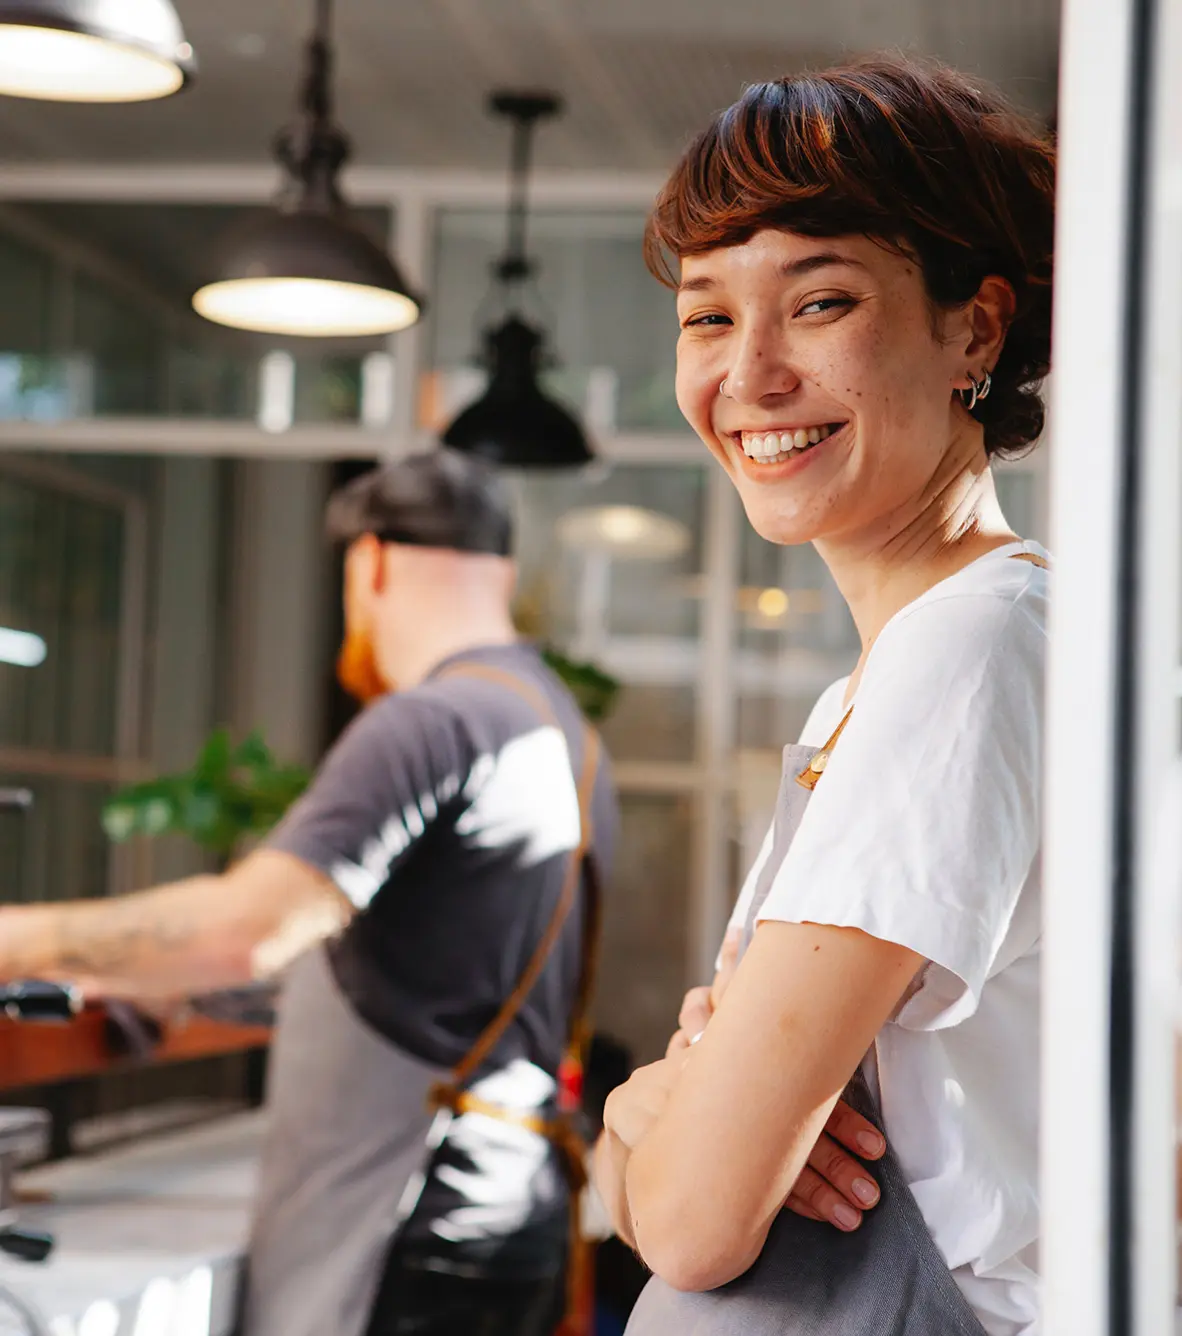 Restaurant staff in kitchen with female staff member smiling at camera